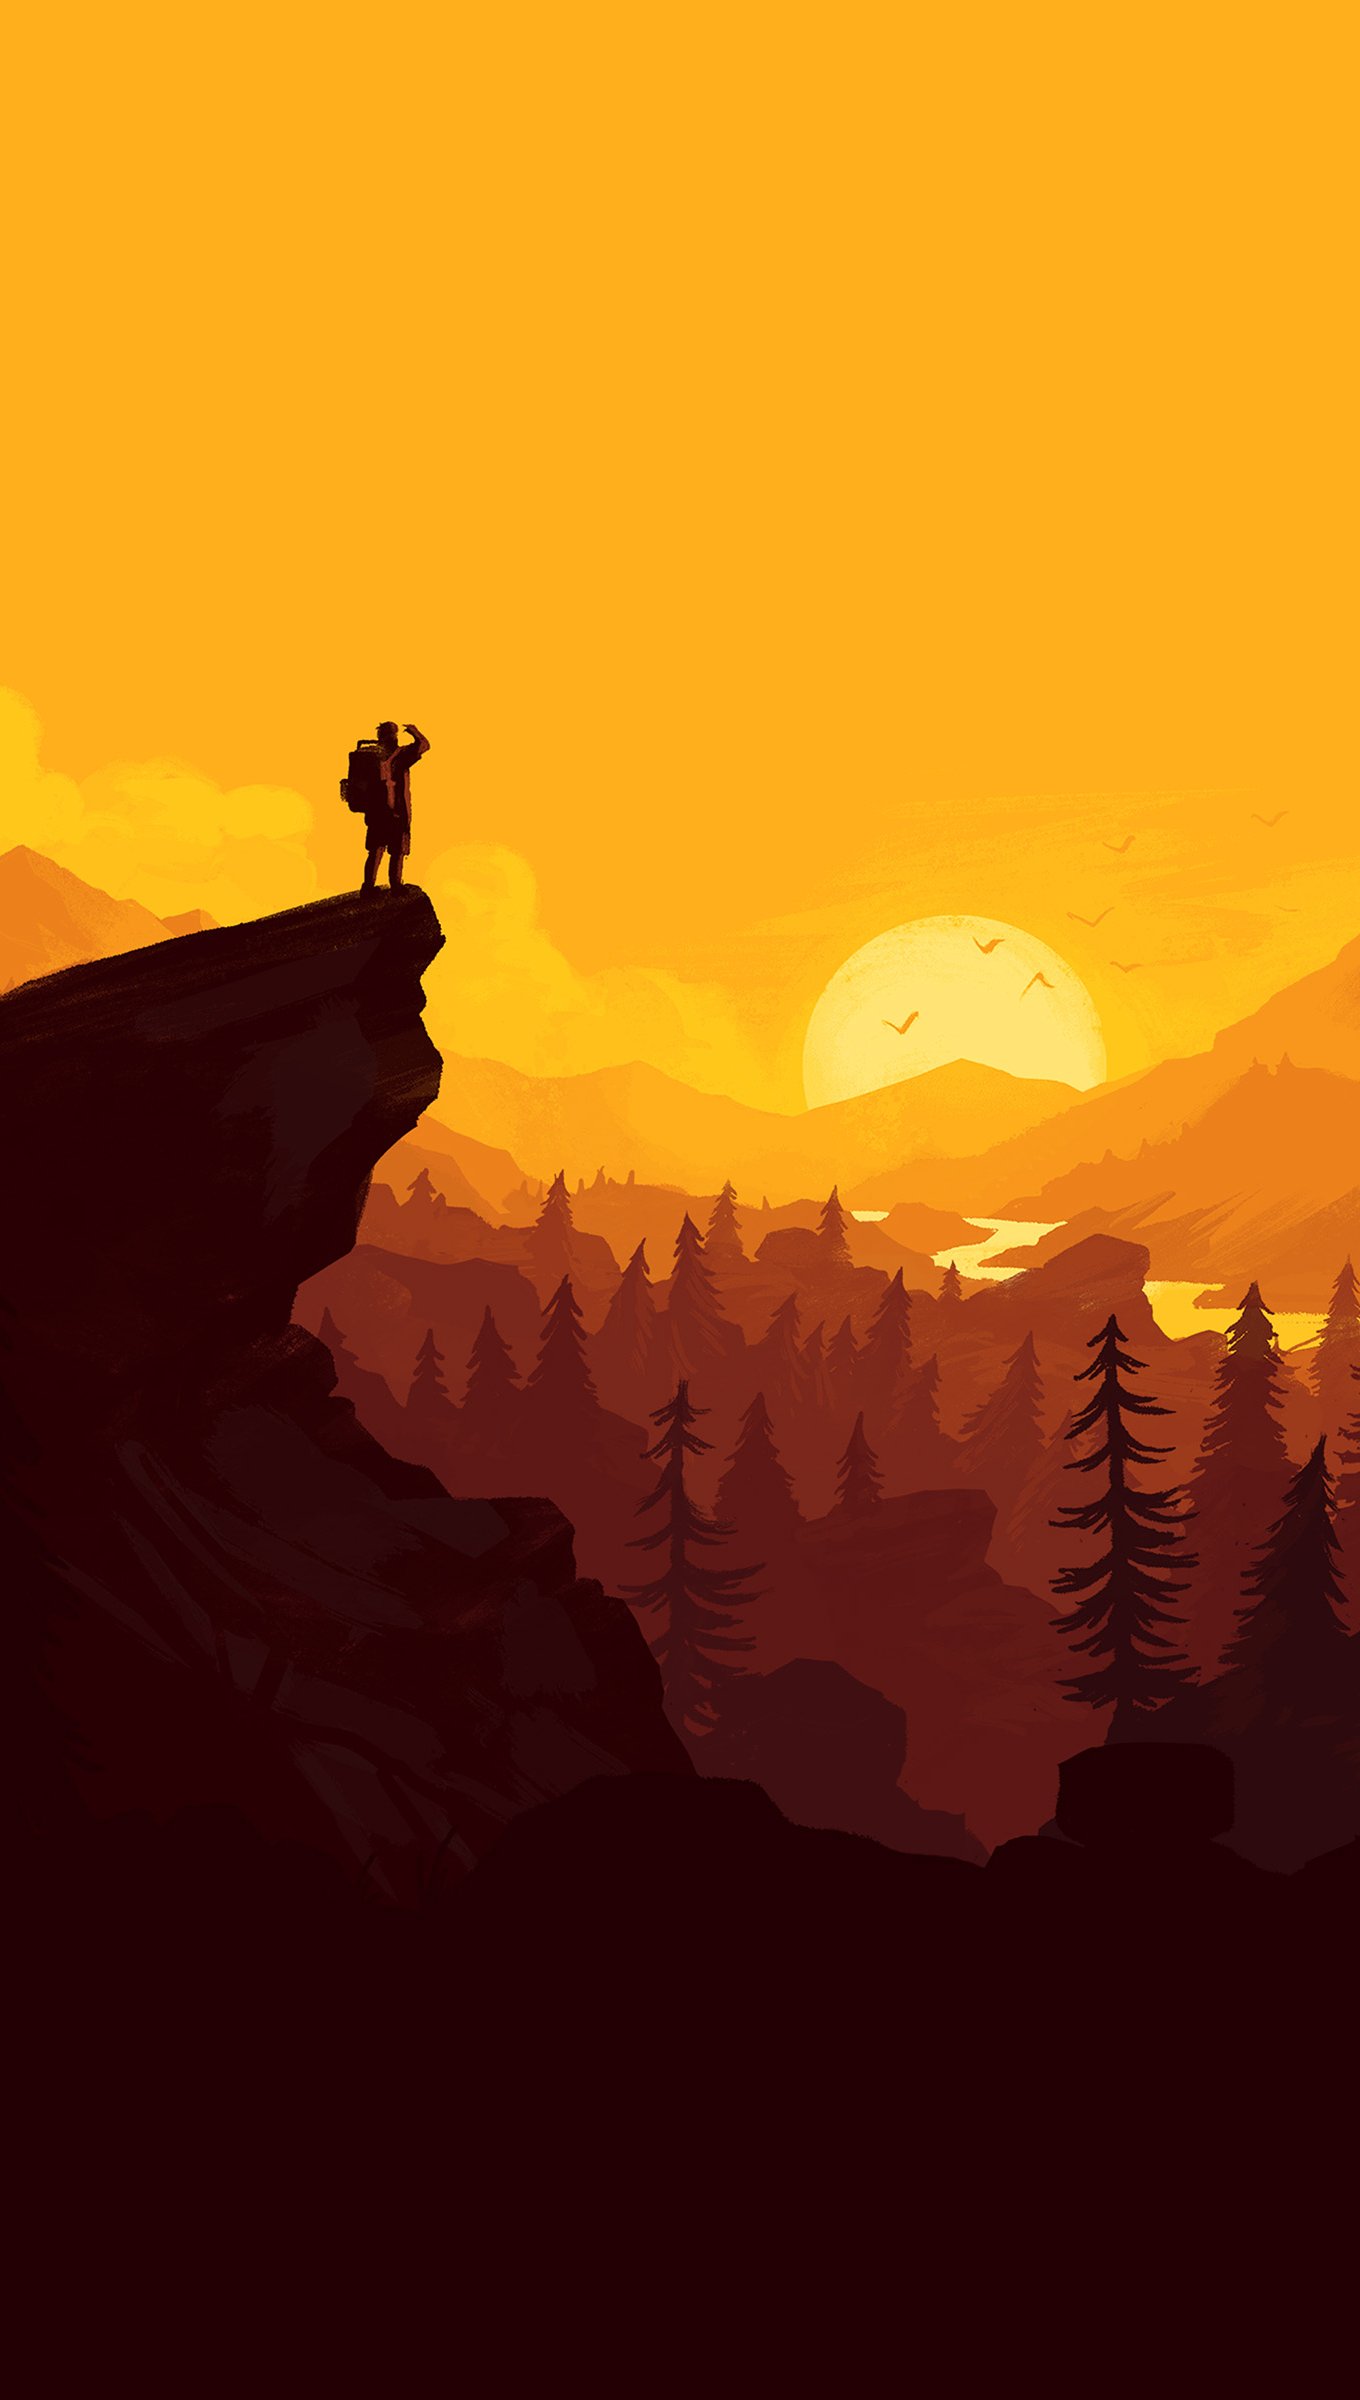 Illustration Sunset in the forest Wallpaper 4k Ultra HD